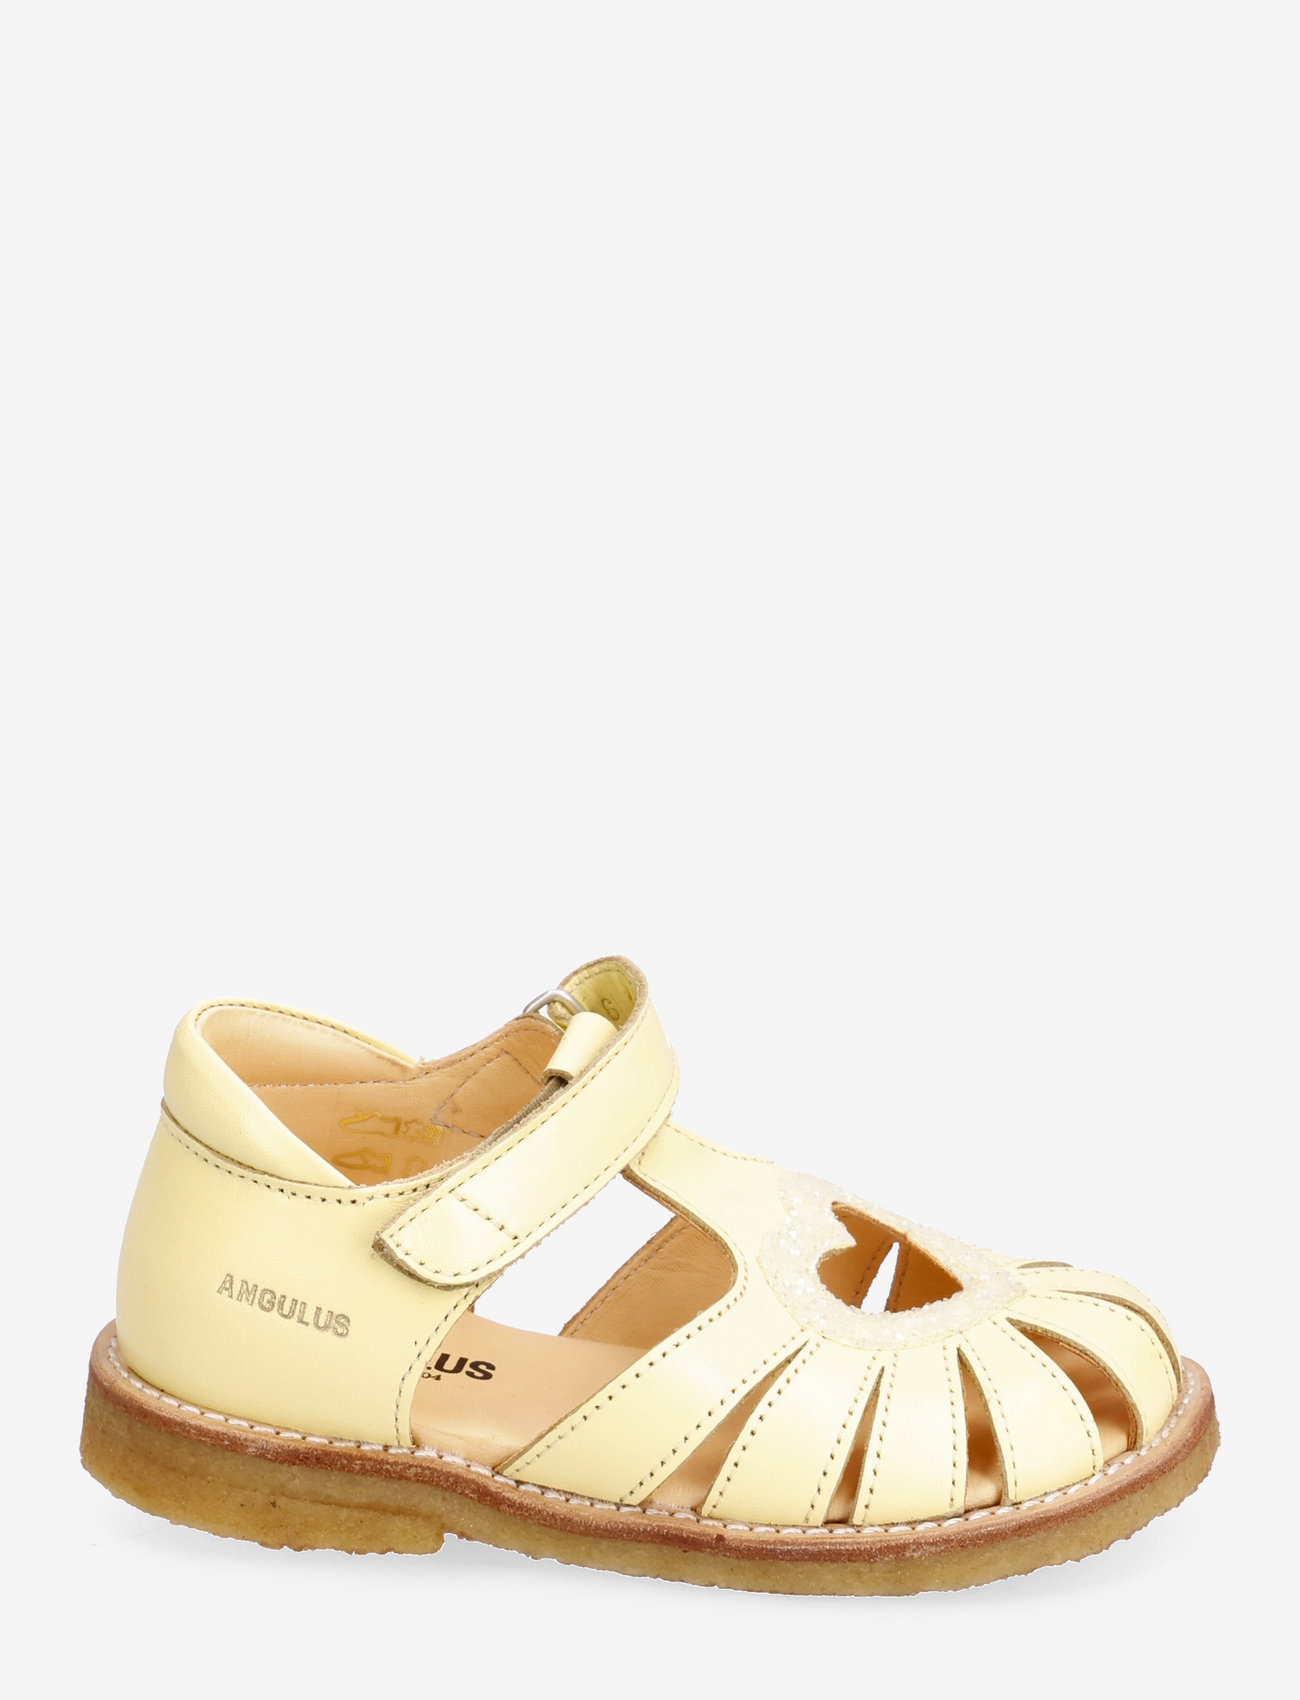 ANGULUS - Sandals - flat - closed toe - - sommerschnäppchen - 1495/2696 ligth yellow/ligth y - 1